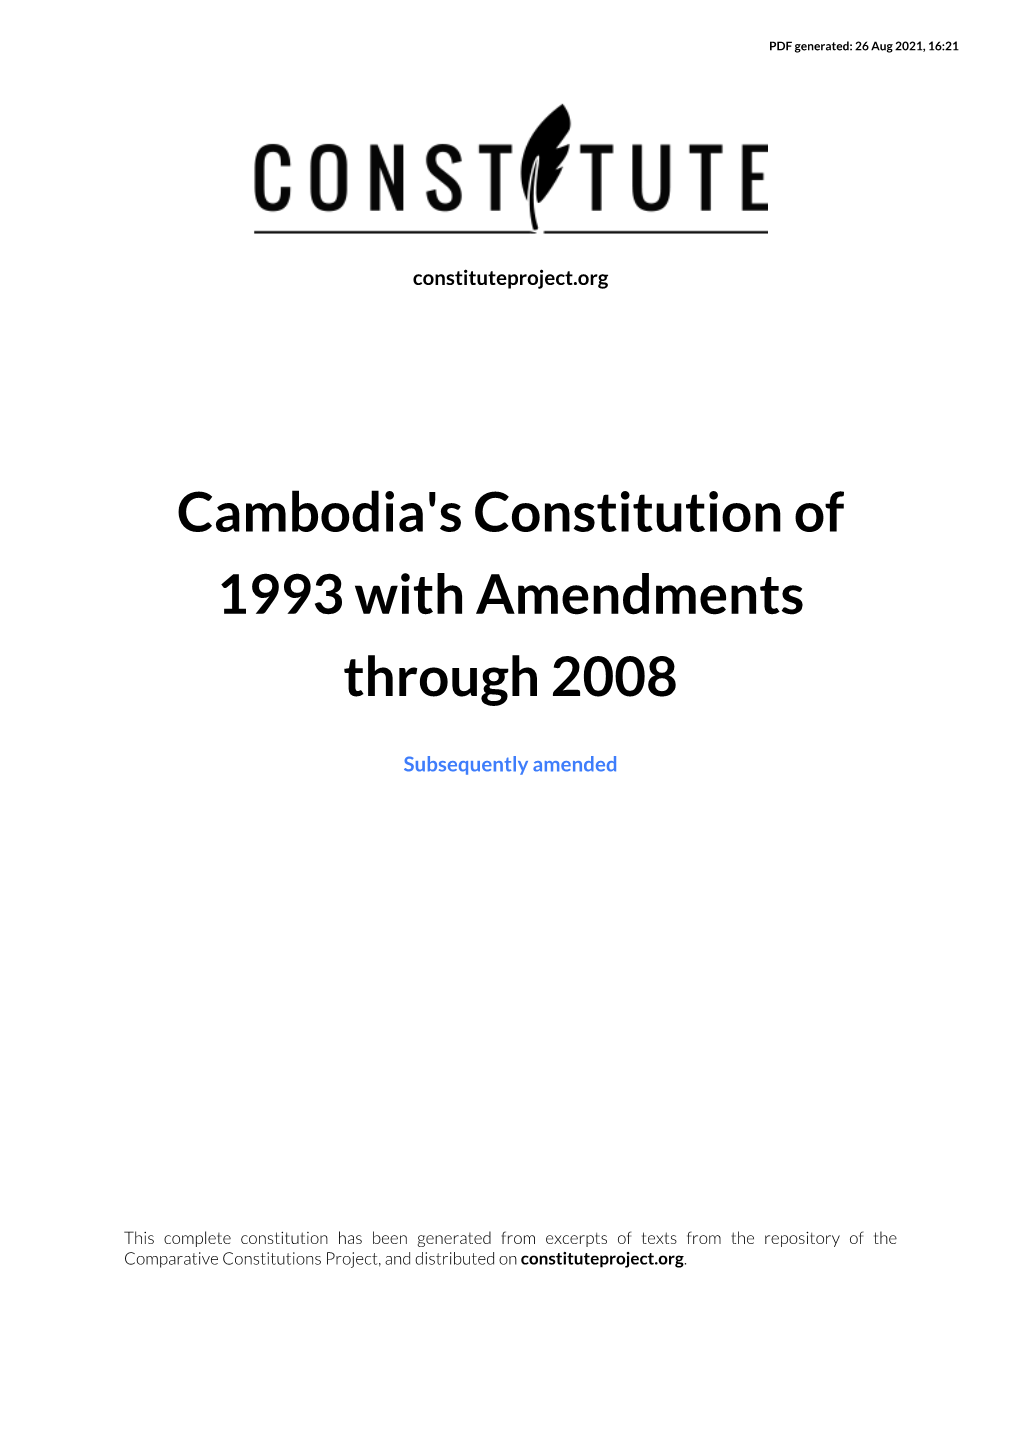 Cambodia's Constitution of 1993 with Amendments Through 2008